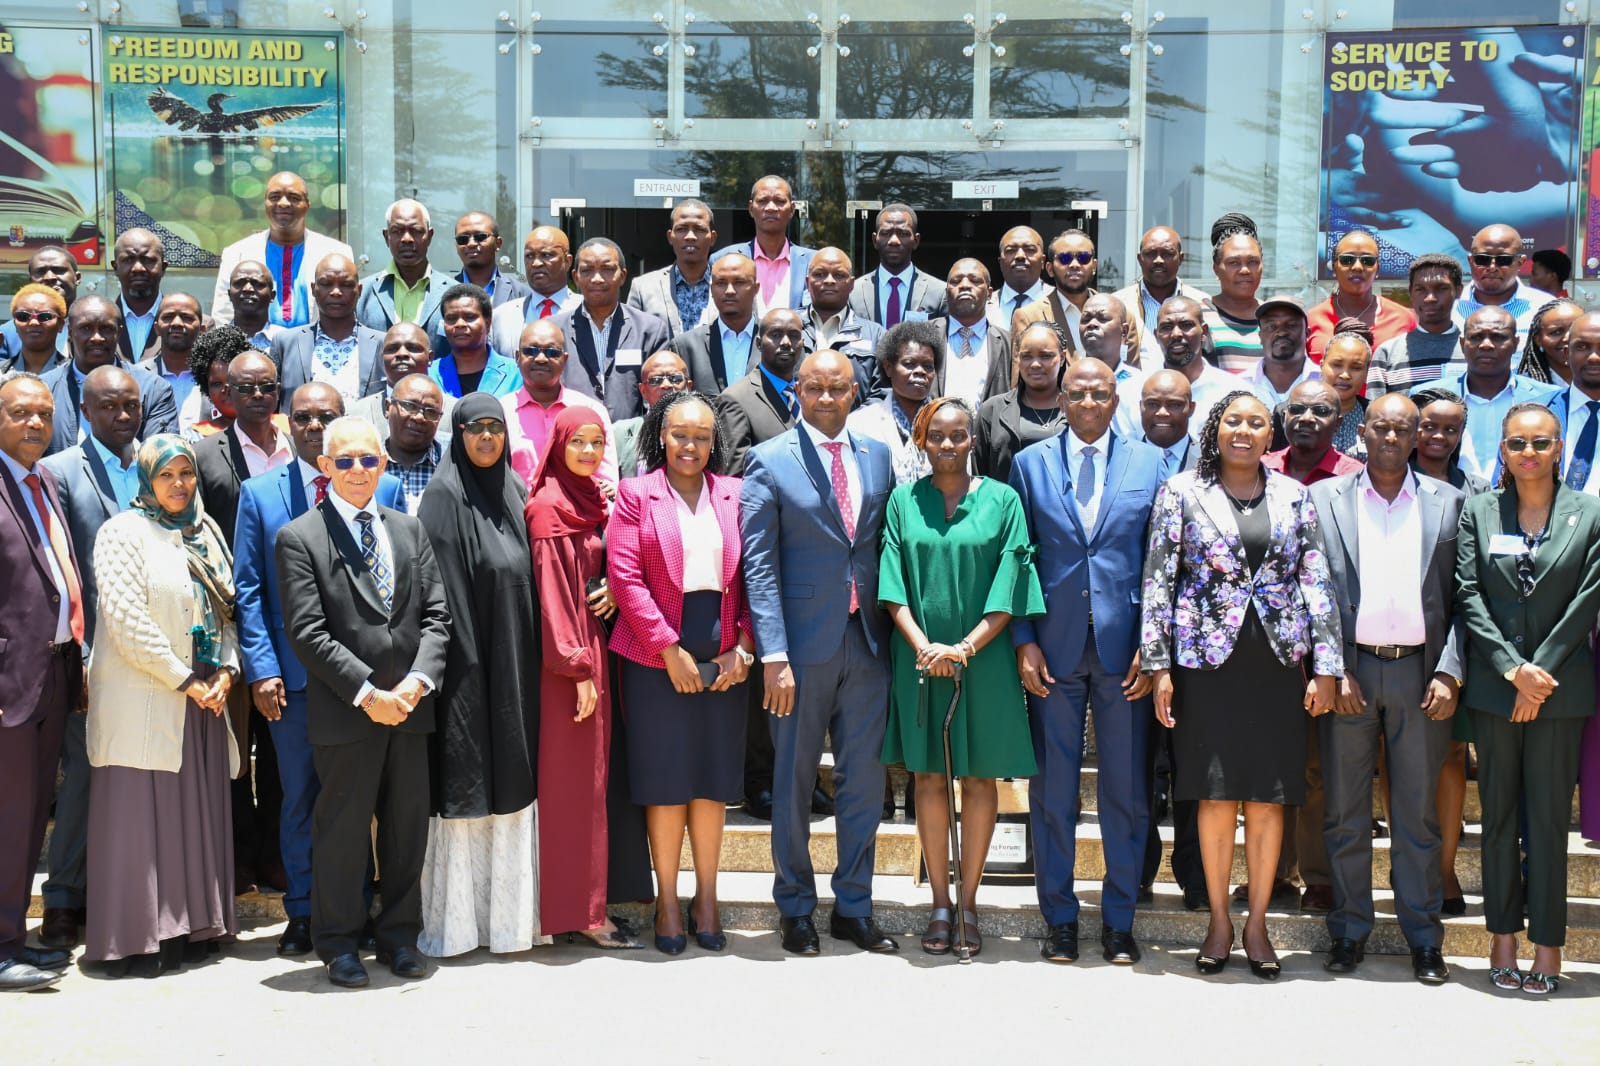 Today, the Principal Secretary State Department for Cooperatives, Mr Patrick Kilemi, attended a Cooperative Public Policy Making Process (PPMP) Learning Forum at Strathmore University The event theme is " Policy to Action." Global communities have been implementing the Cooperatives Leadership Engagement Advocacy and Research (CLEAR) program (2018-2023) funded by the United States Agency for International Development (USAID) which in turn has provided technical assistance to the National Cooperative Policy Implementation Task Force to develop and popularize the National Cooperative Bill. PS Kilemi noted that the National Government’s policy review reached a significant milestone one of the tangible outcomes being the draft of Cooperative Bill-a testament to the commitment to provide an enabling environment for cooperatives to thrive in Kenya. He then led Tree planting ceremony to commemorate the event. In attendance, Ms. Olga Oyier, Kenya team lead, and policy & legislative Affairs specialist at Global Communities USAID CLEAR program, Prof Izael Da Silva Deputy Vice-chancellor for Research and Innovation Strathmore University, Daniel Marube CEO Cooperatives Alliance of Kenya, Director Kizito Council of governors and other high-level delegates who graced the occasion.